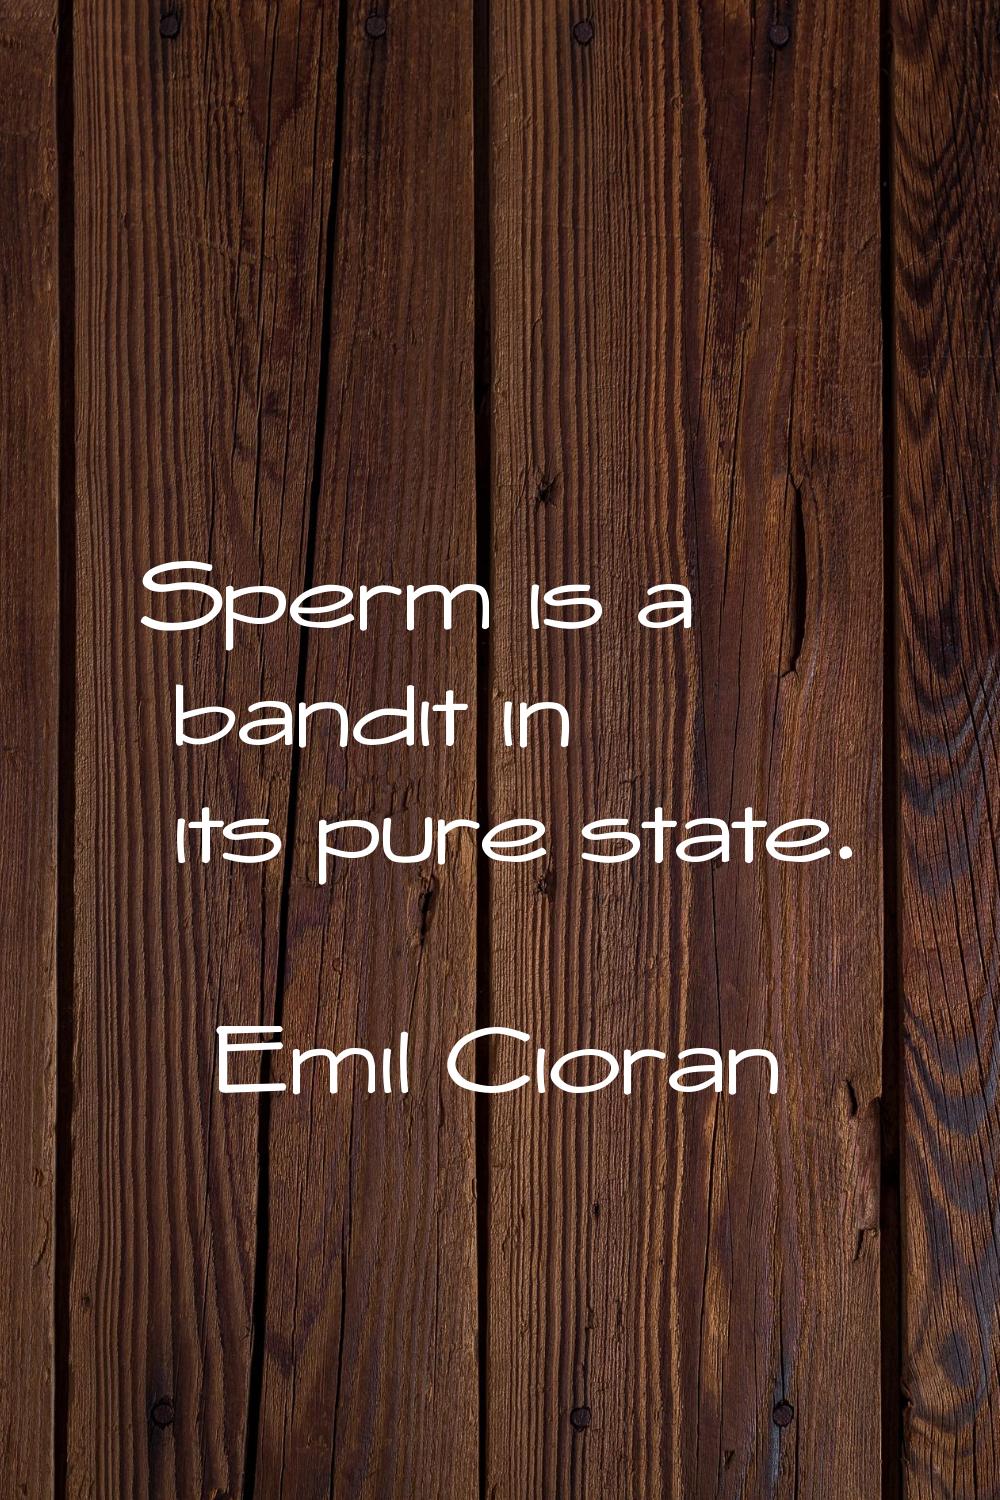 Sperm is a bandit in its pure state.